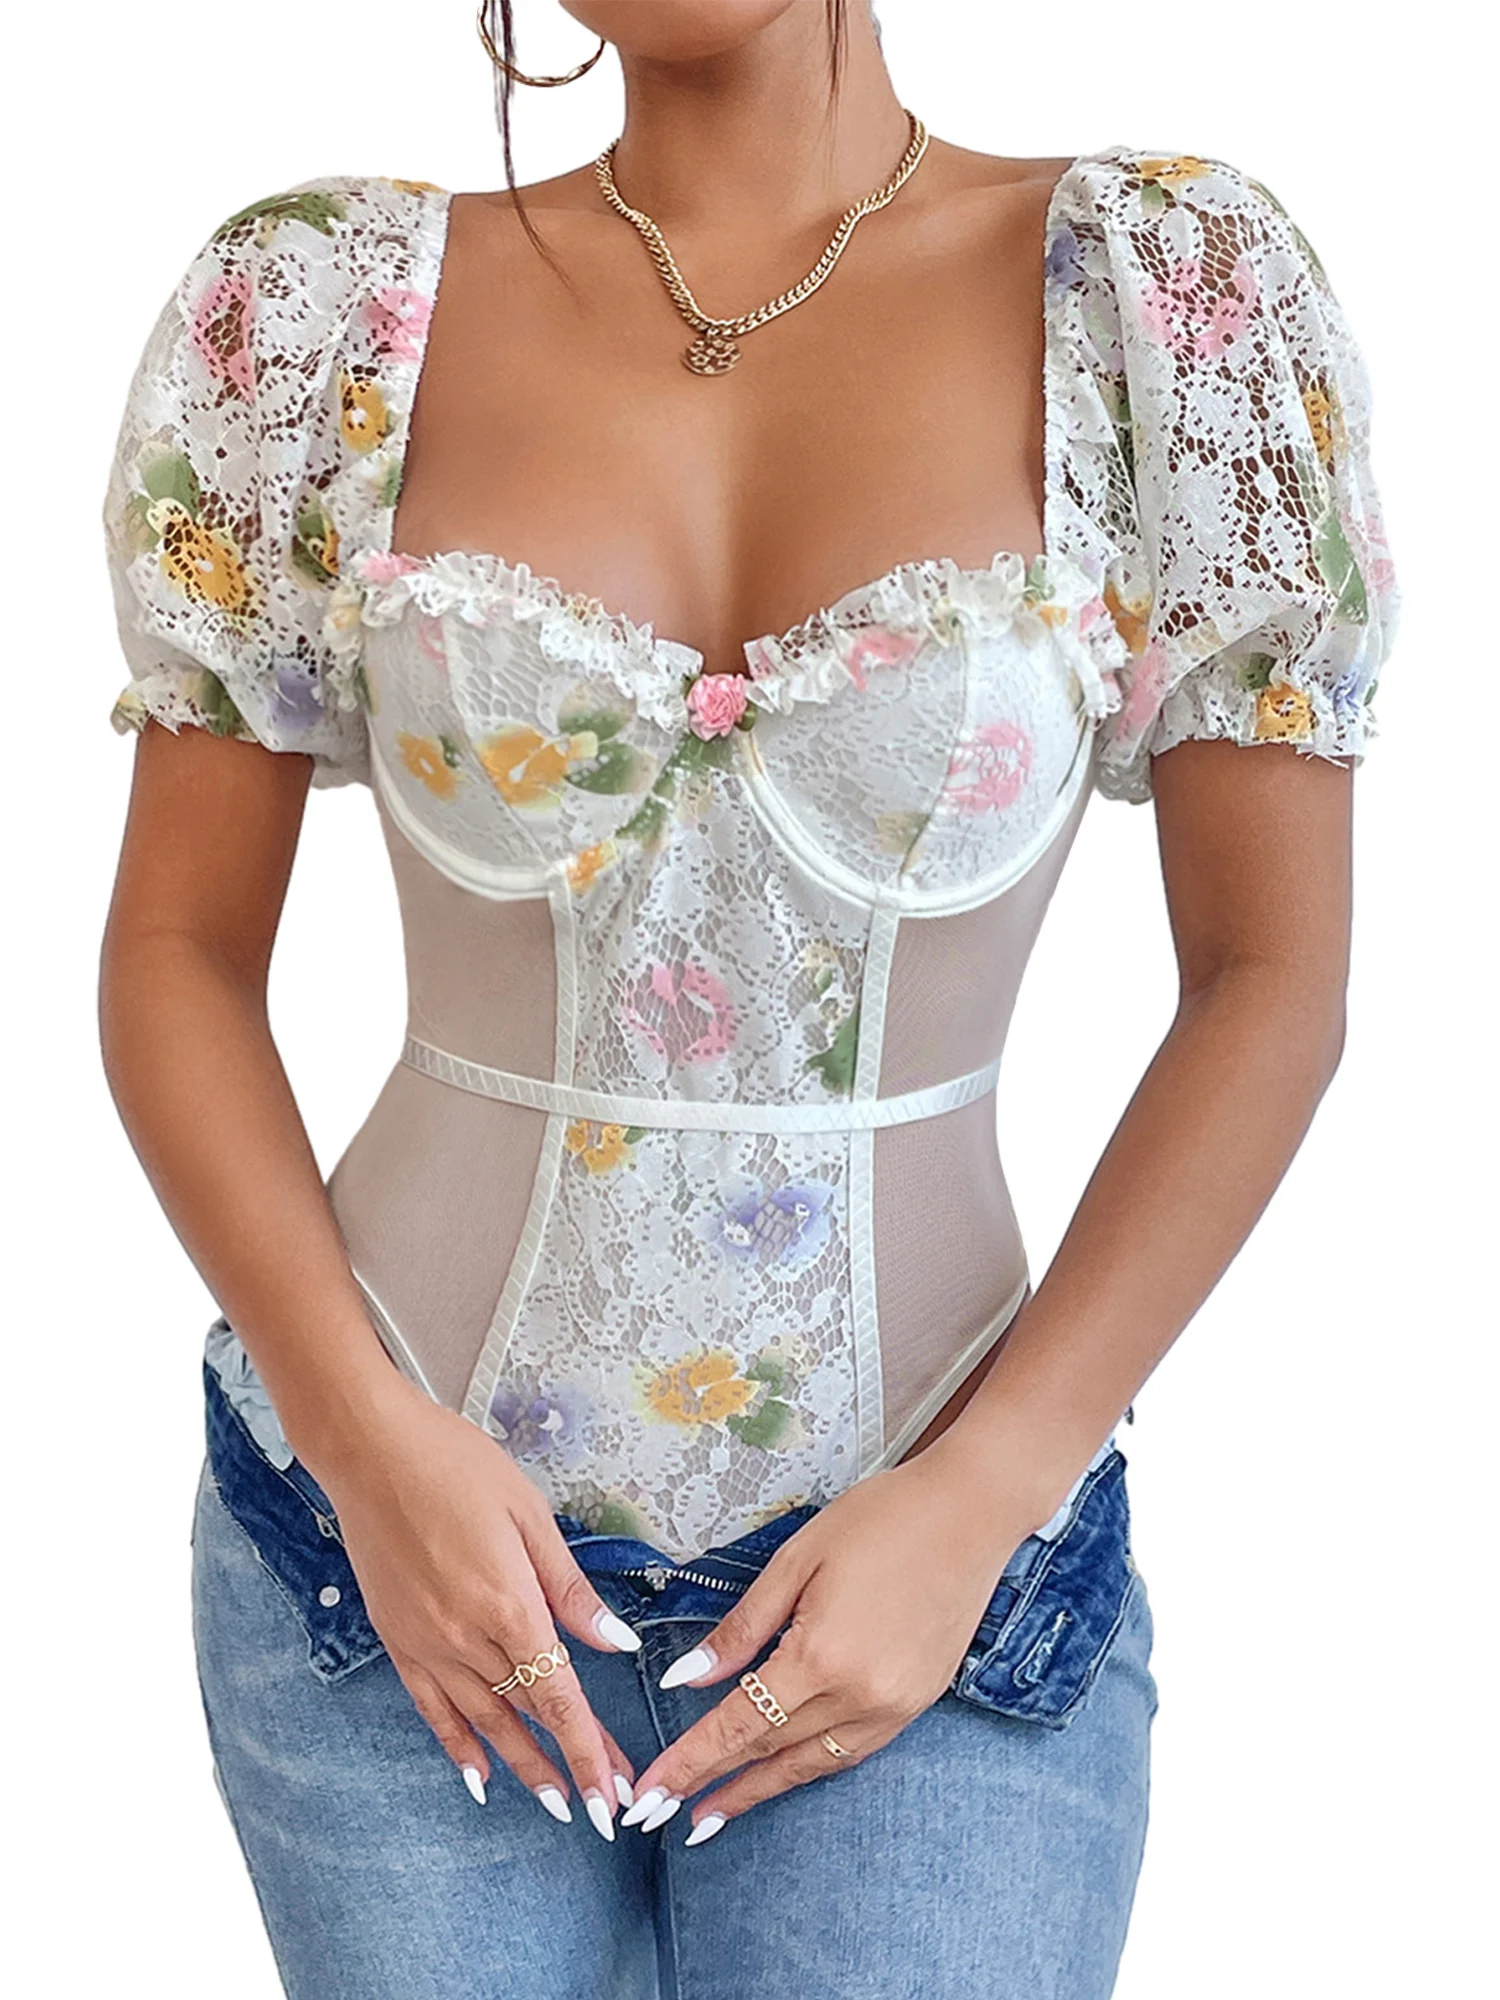 

Women s Sheer Lace Bodysuit with Short Puff Sleeves Mesh Patchwork Floral Print and Corset Detailing - Stylish Leotard